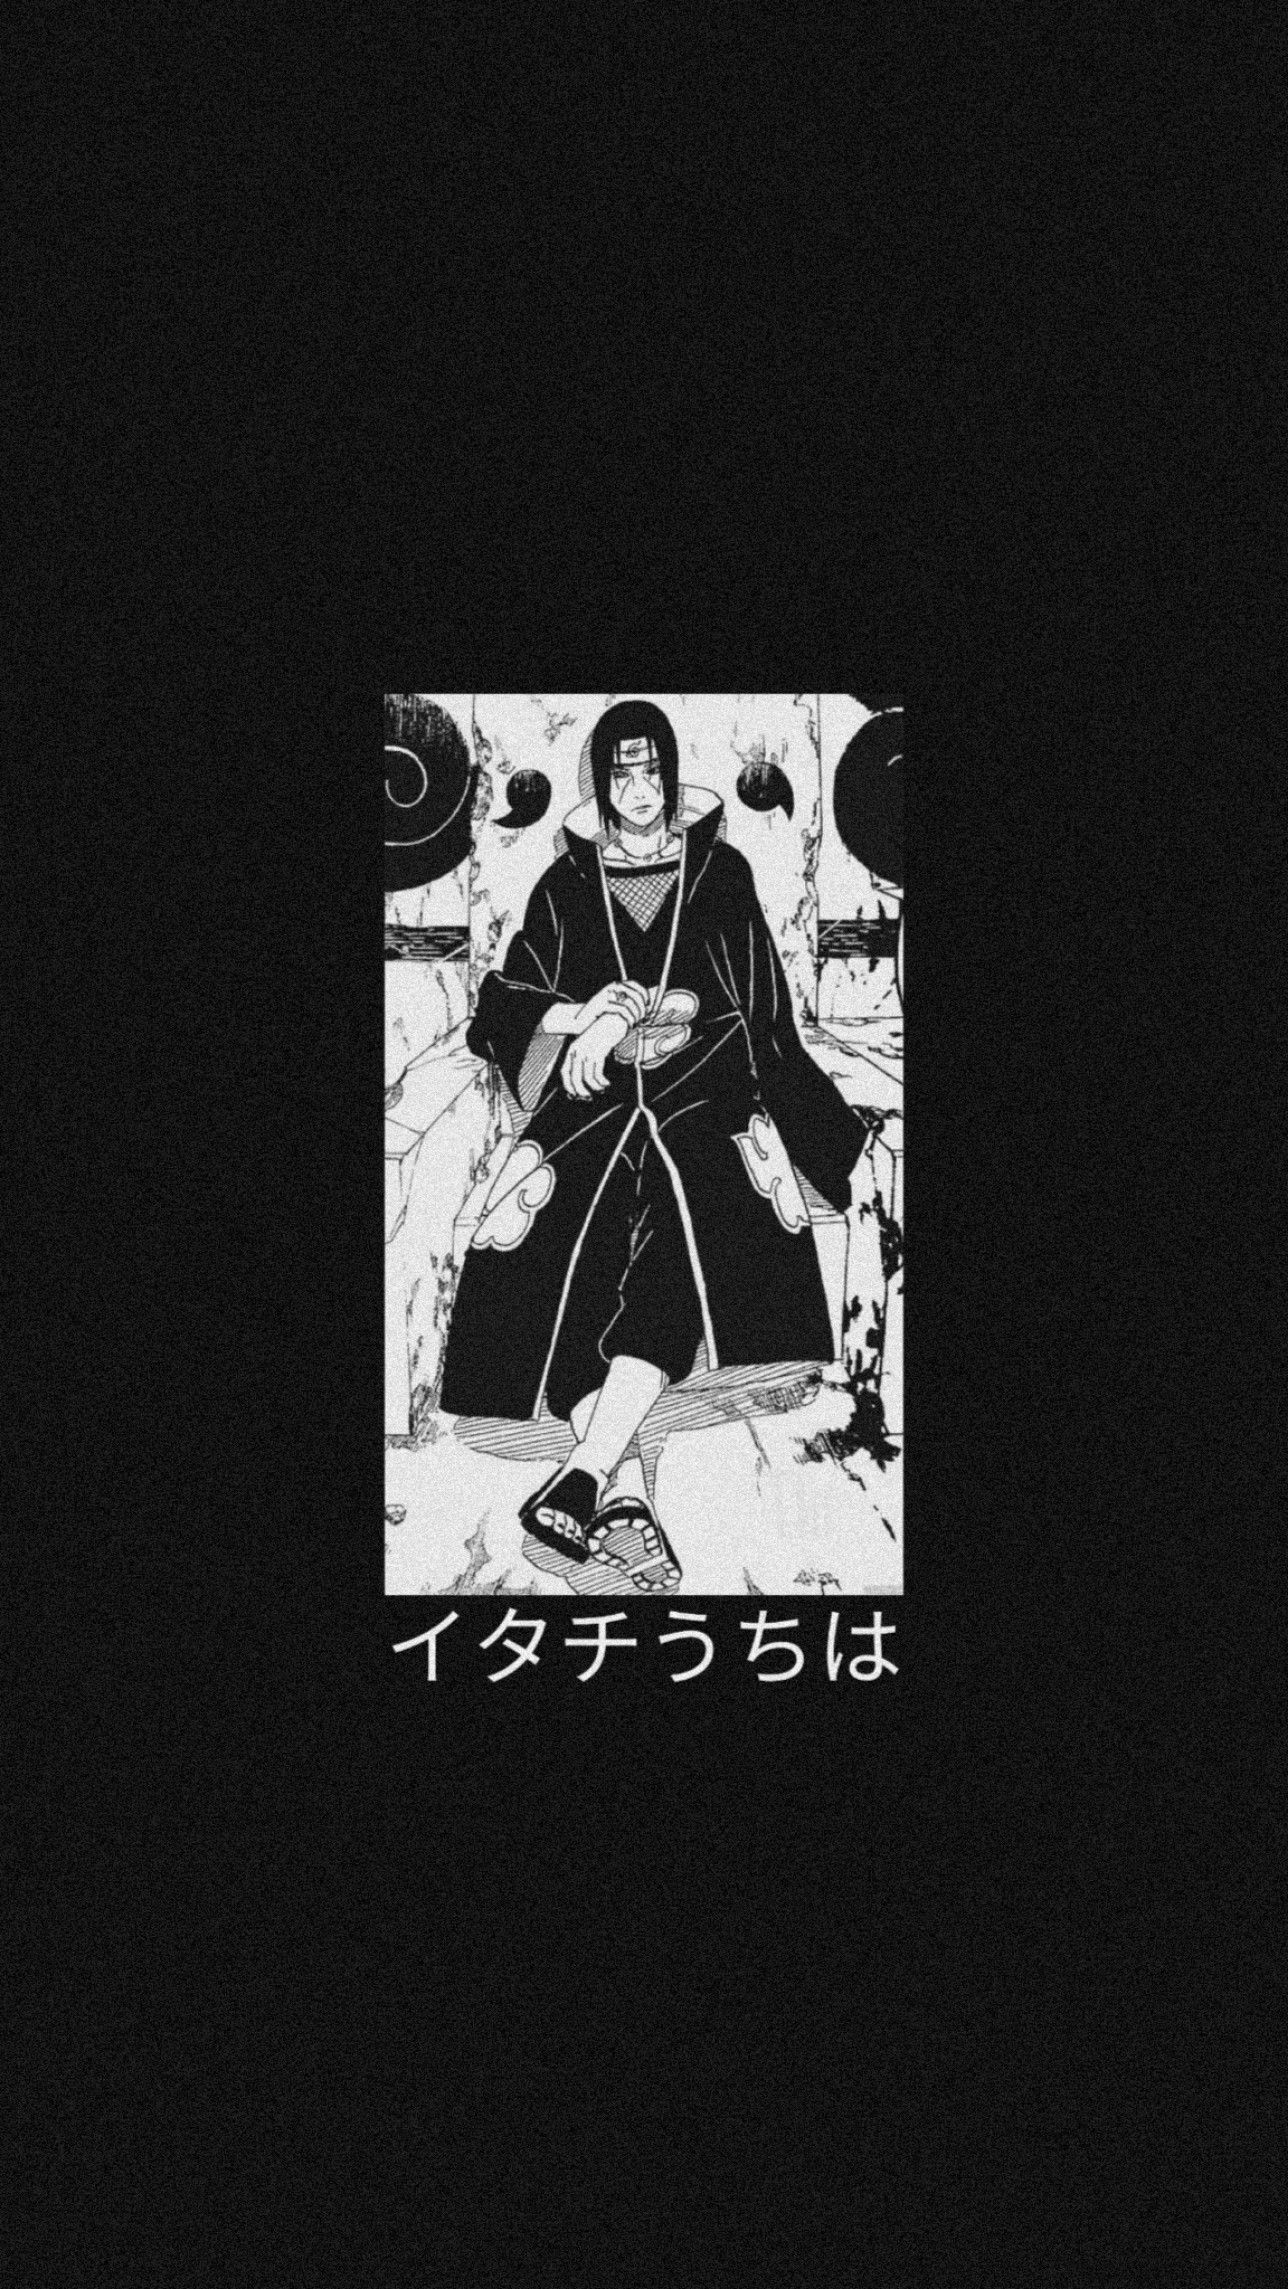 Aesthetic Ps4 Itachi Wallpapers - Wallpaper Cave